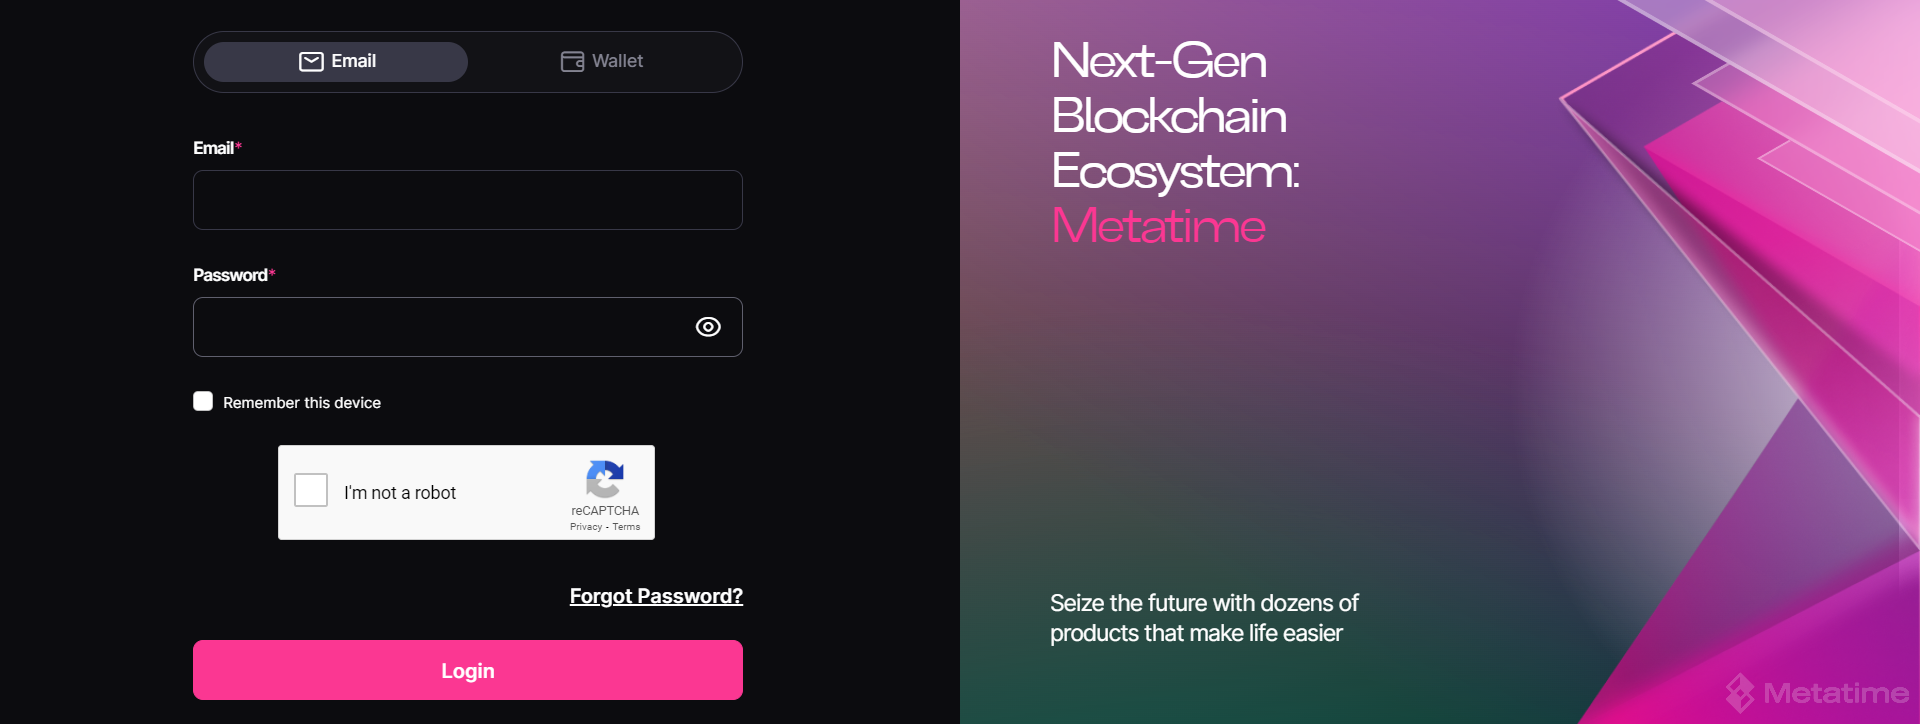 How Can You Transfer The MTC Tokens Into Your Wallet? - Metatime